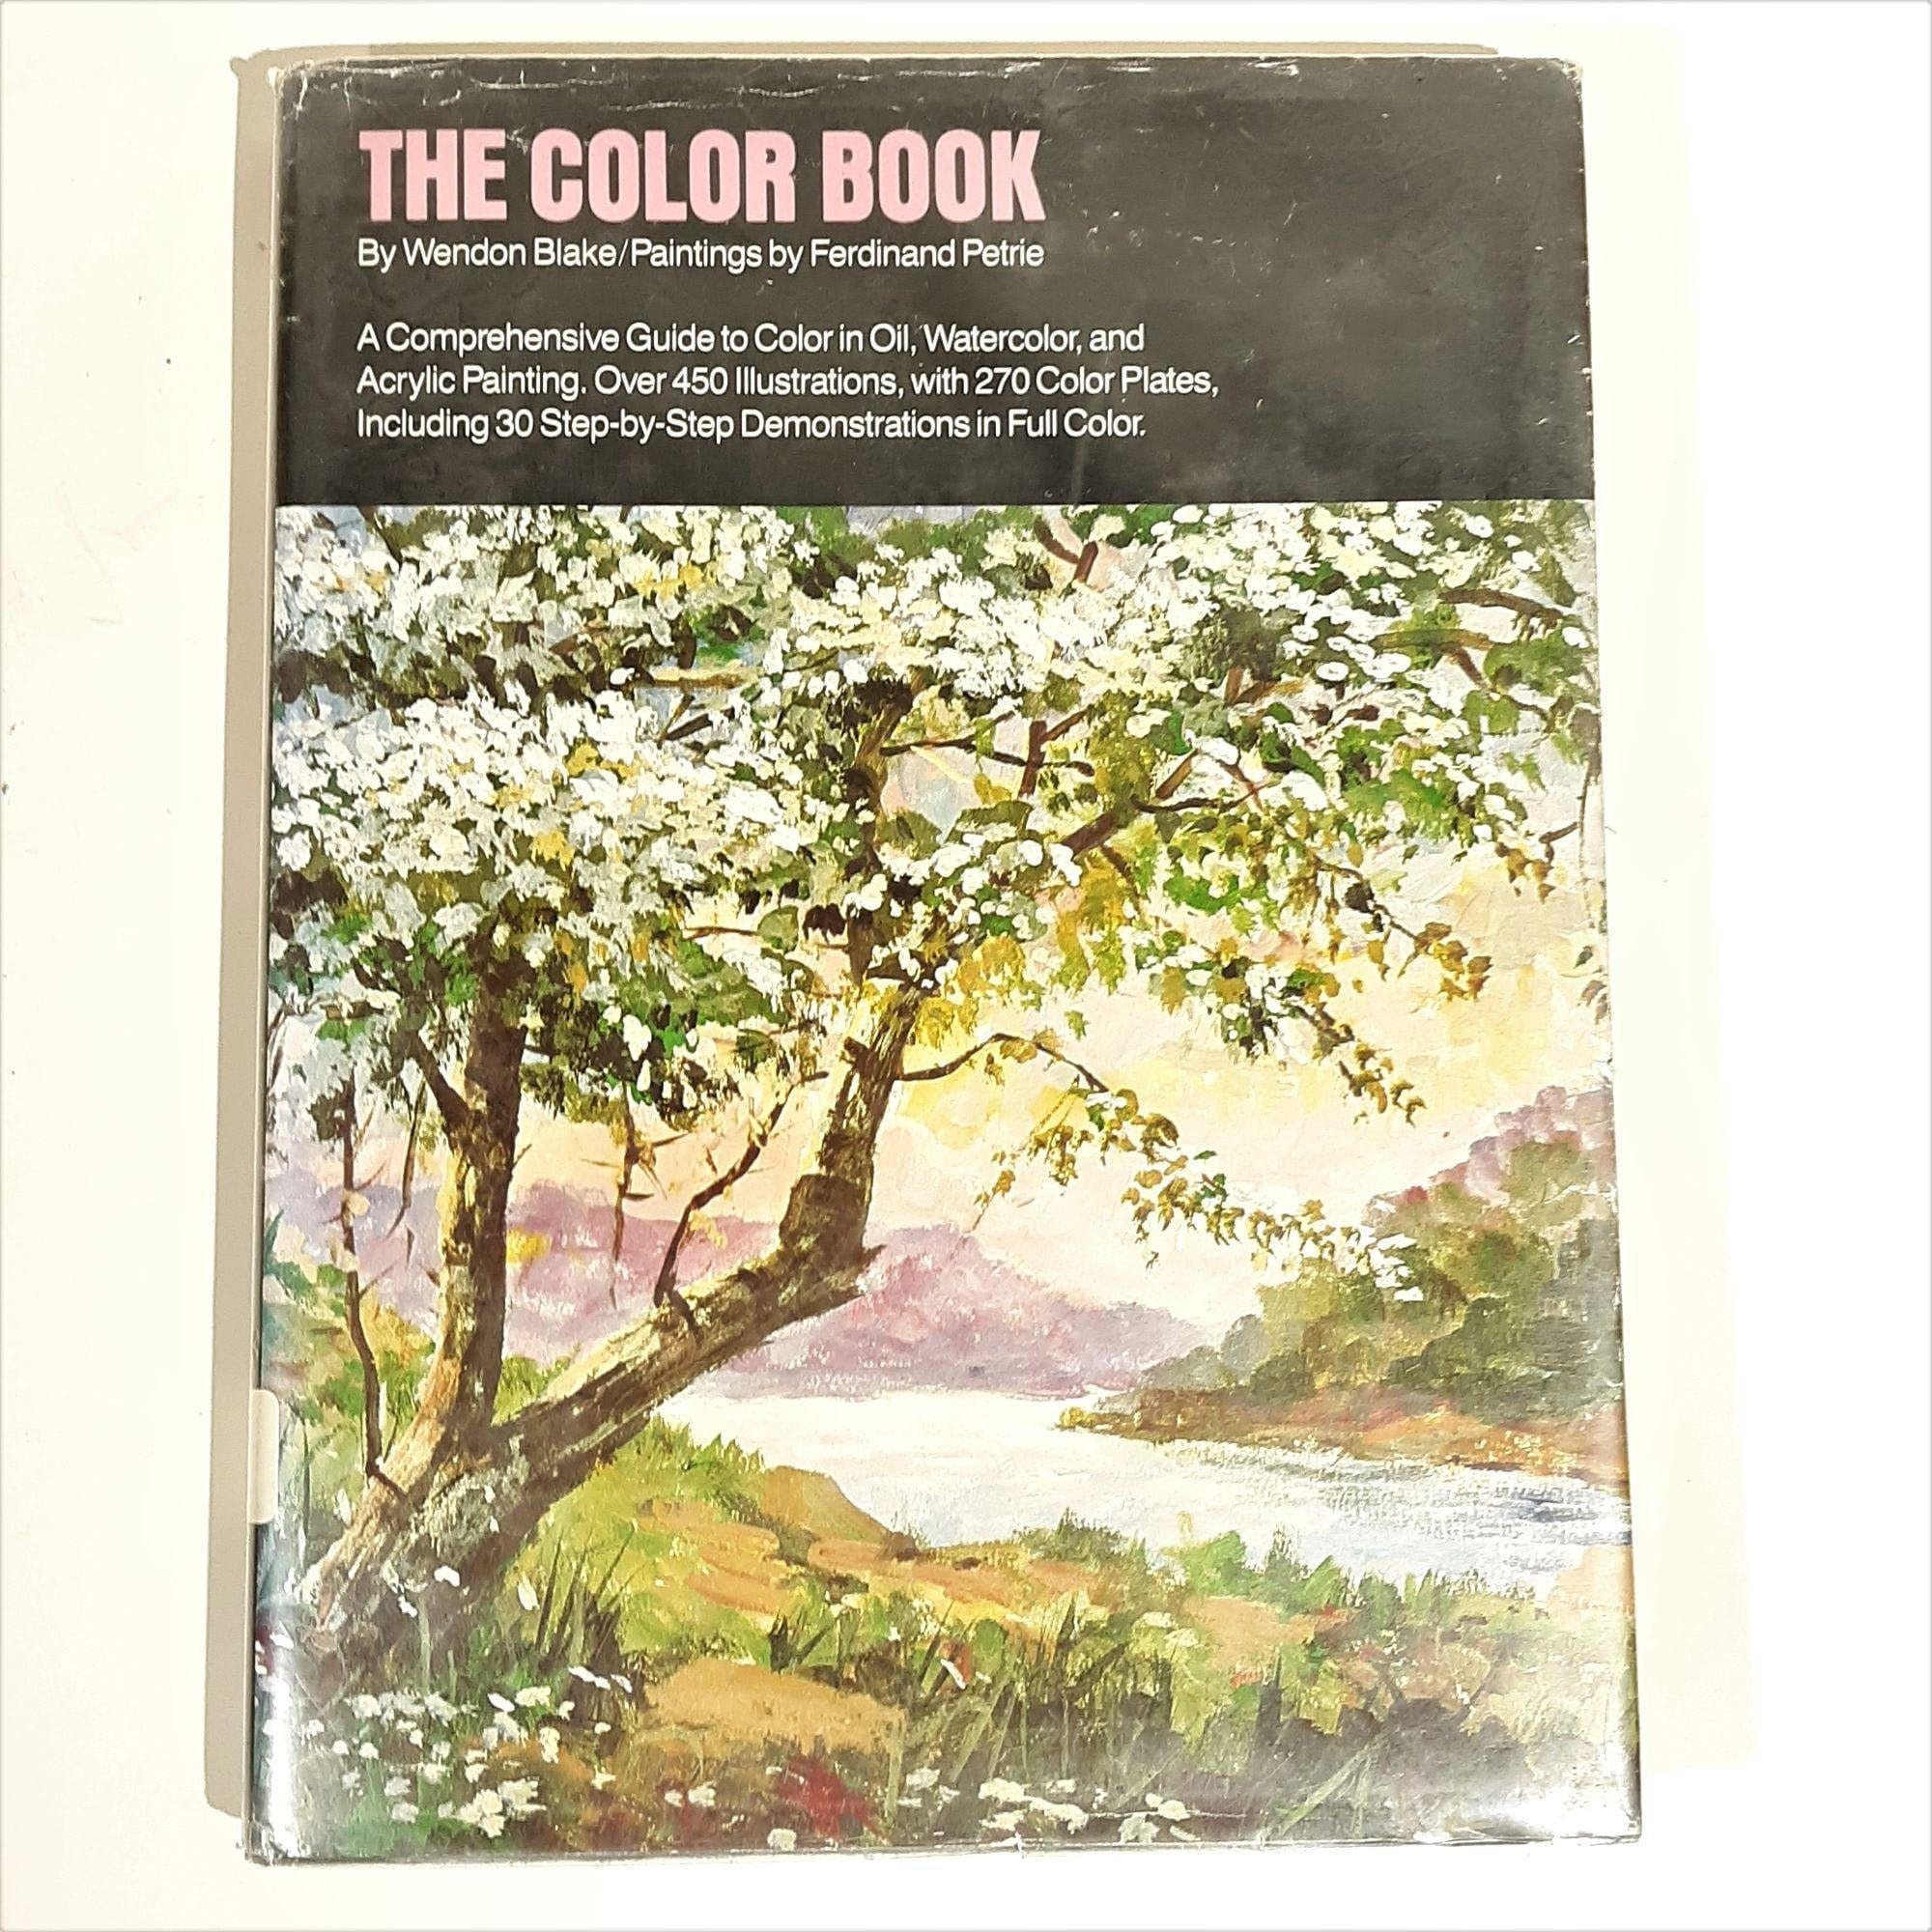 Acrylic Painting: A Step-by-Step Instruction Book by Wendon Blake